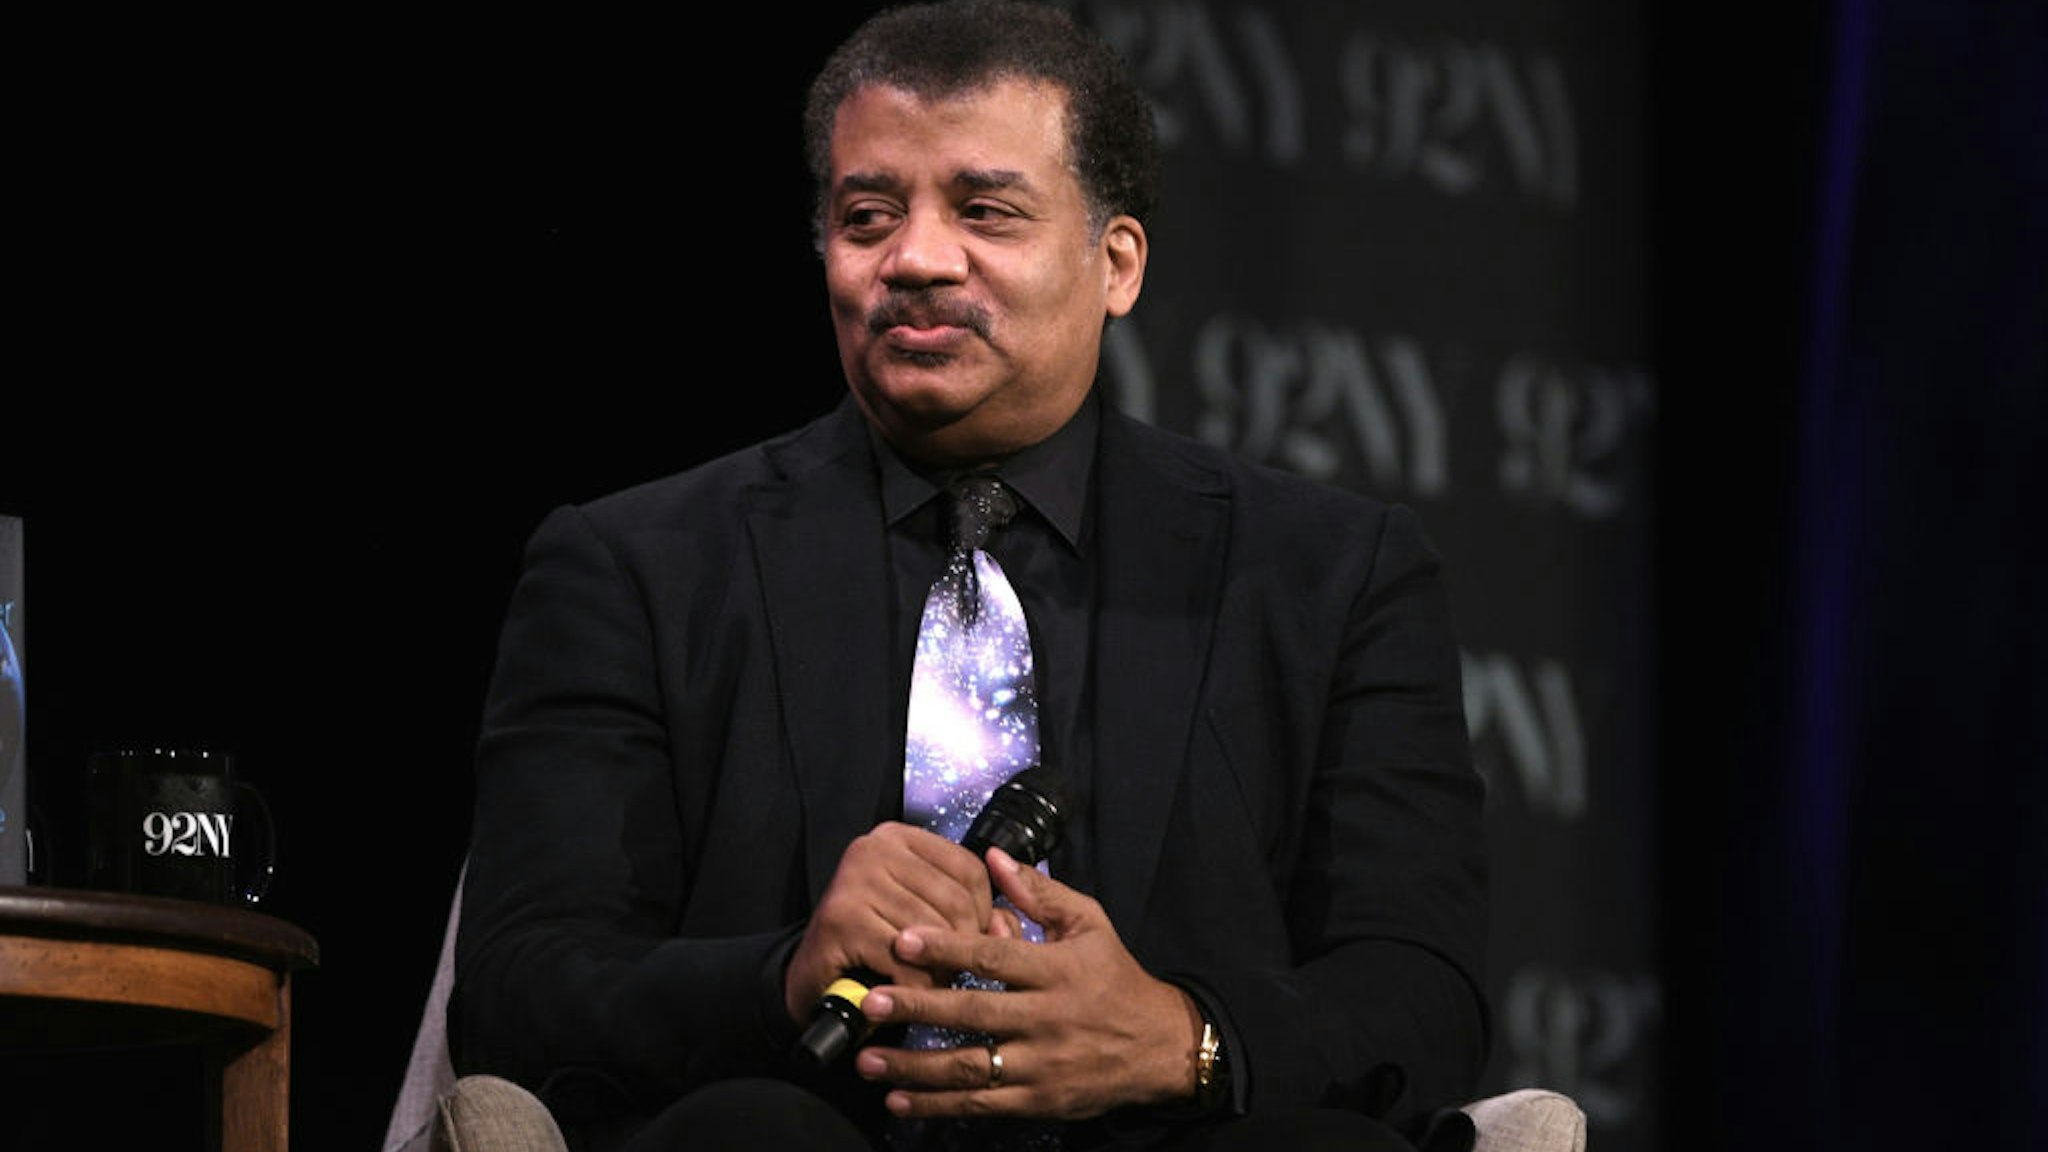 NEW YORK, NEW YORK - OCTOBER 19: Astrophysicist and author Neil deGrasse Tyson attends "Neil deGrasse Tyson in Conversation with Gayle King: Starry Messenger" at The 92nd Street Y, New York on October 19, 2022 in New York City. (Photo by Gary Gershoff/Getty Images)